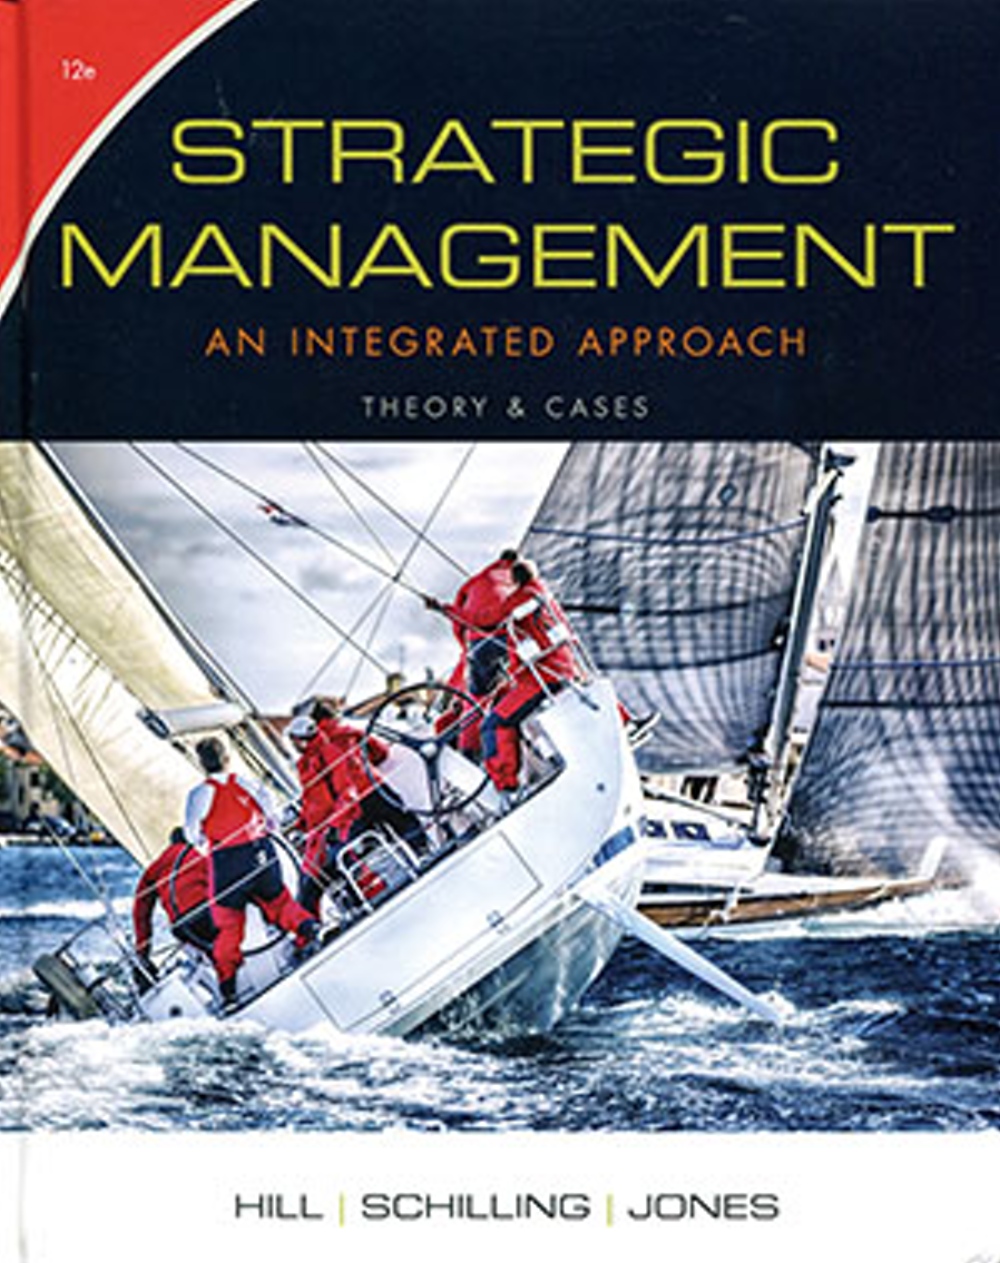 Strategic Management: An Integrated Approach, Theory & Cases(Original)